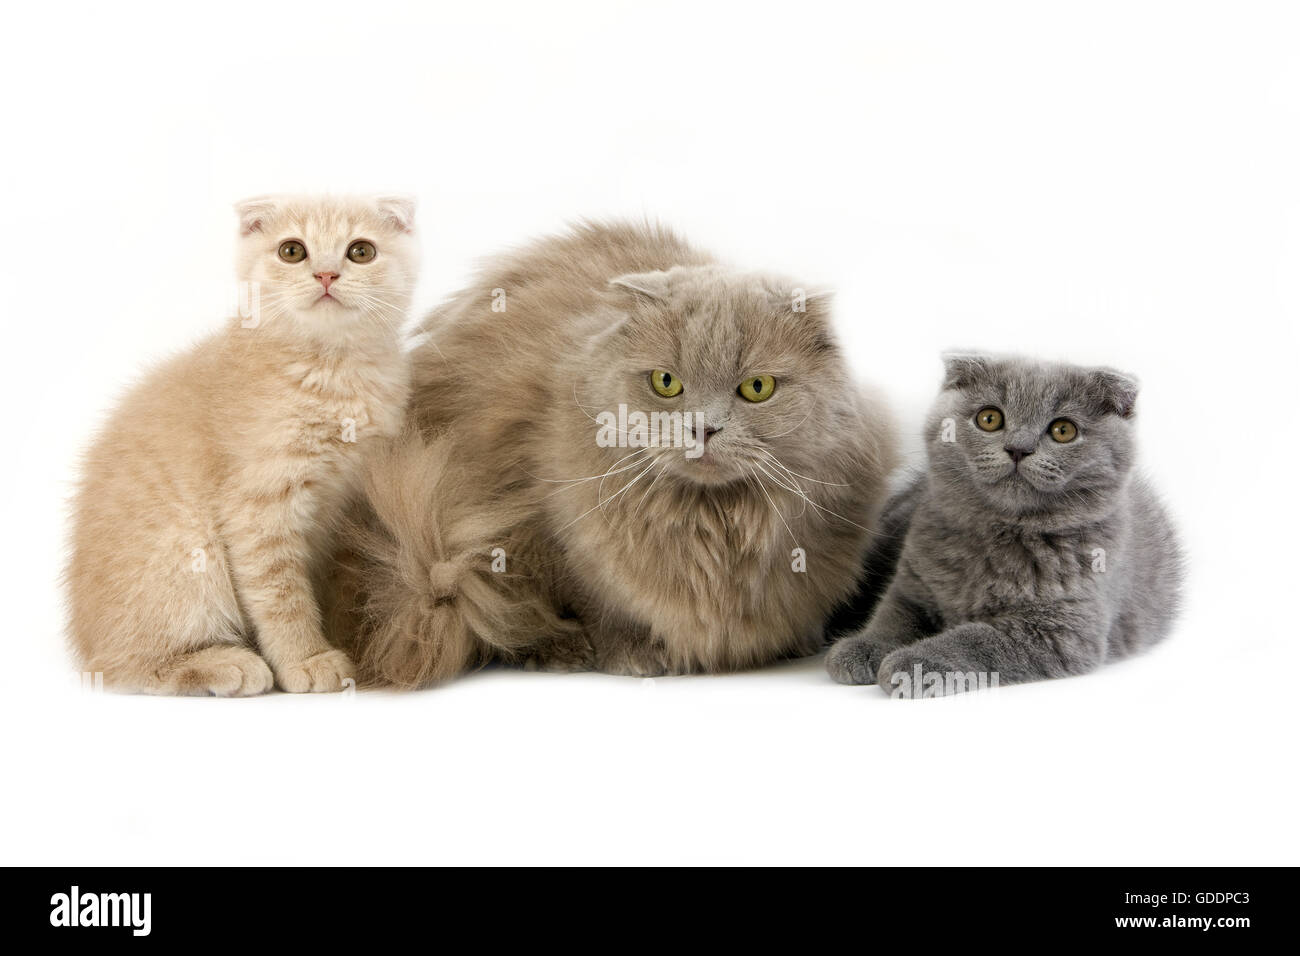 Lilac Self Highland Fold or Lilac Self Scottish Fold Longhair Domestic Cat, Female with Blue and Cream Scottish Fold Kittens standing against White Background Stock Photo